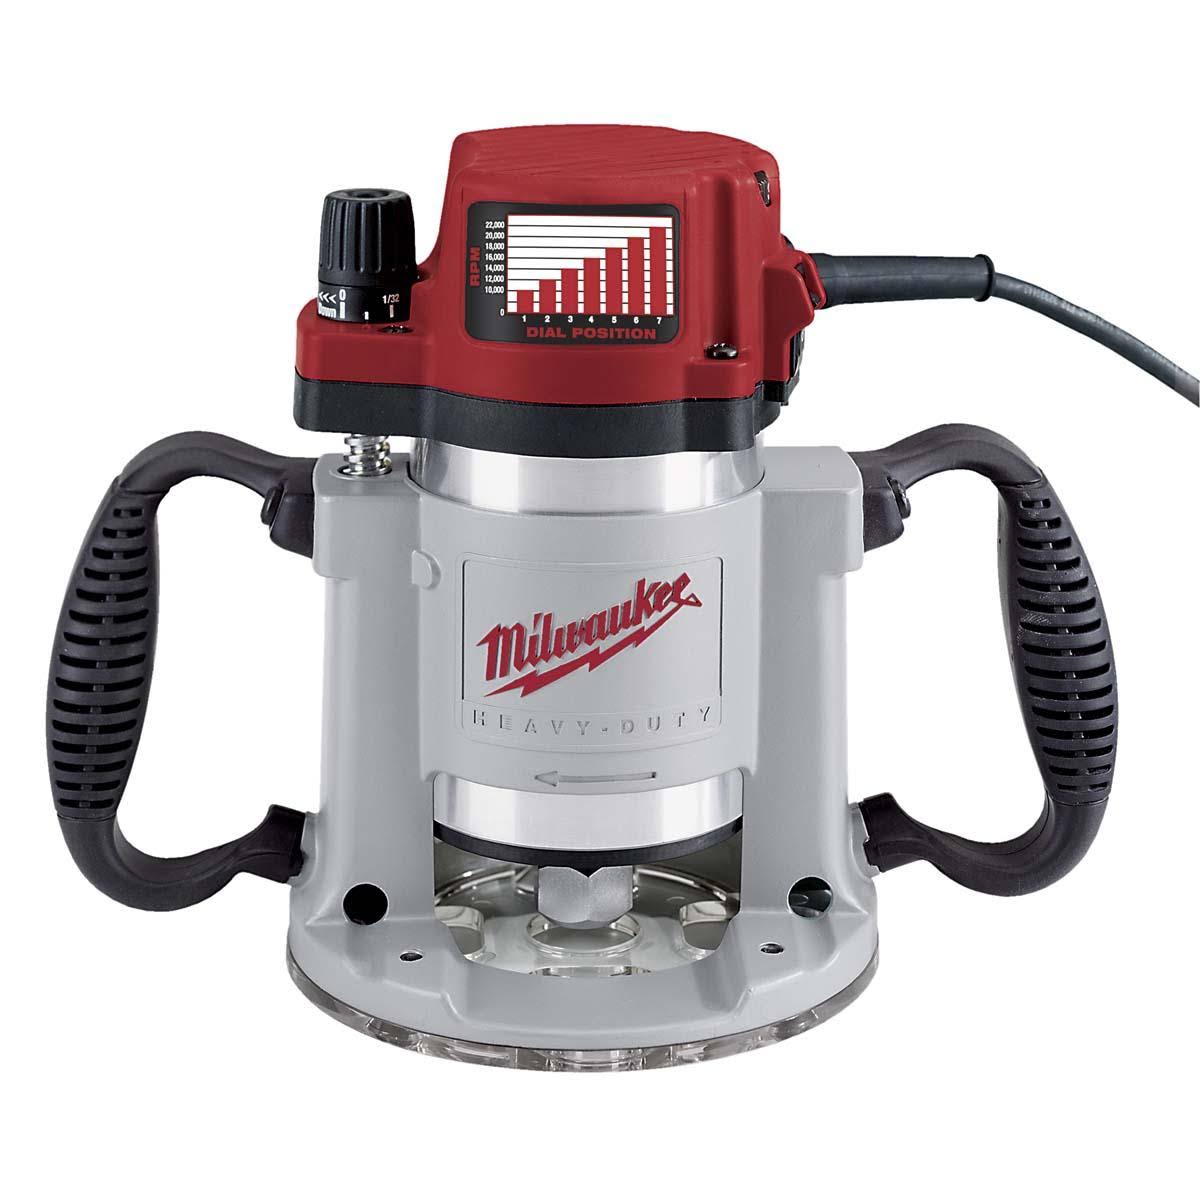 Milwaukee 562520 Fixed Base Production Router - 3 1/2hp